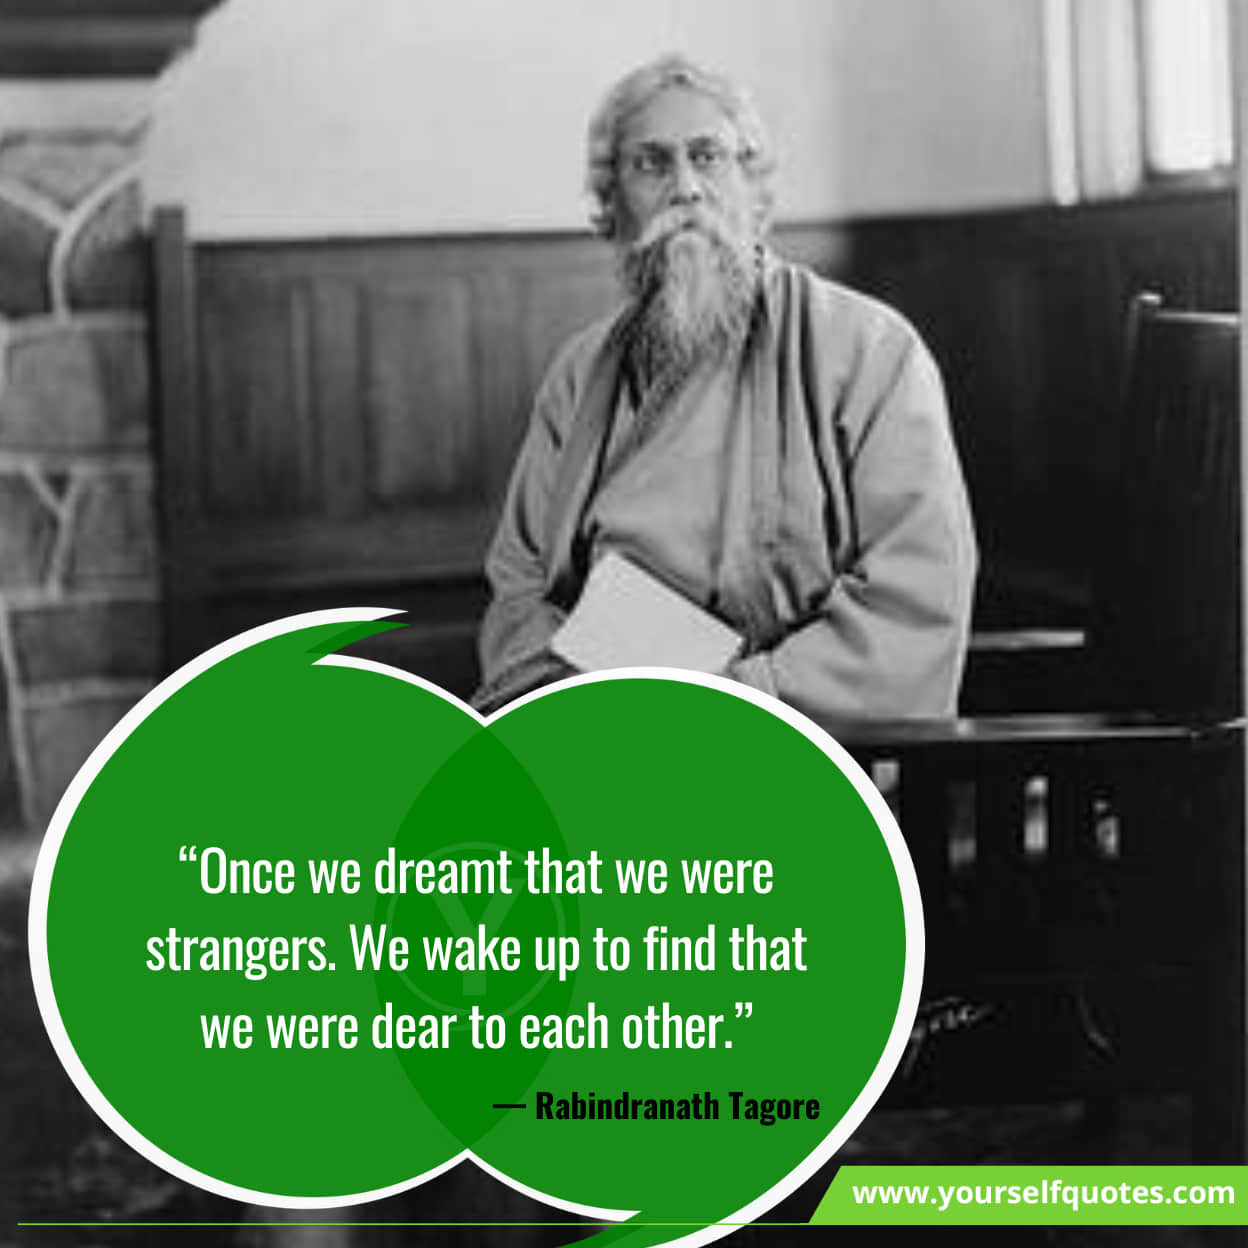 Tagore quotes on love and relationships